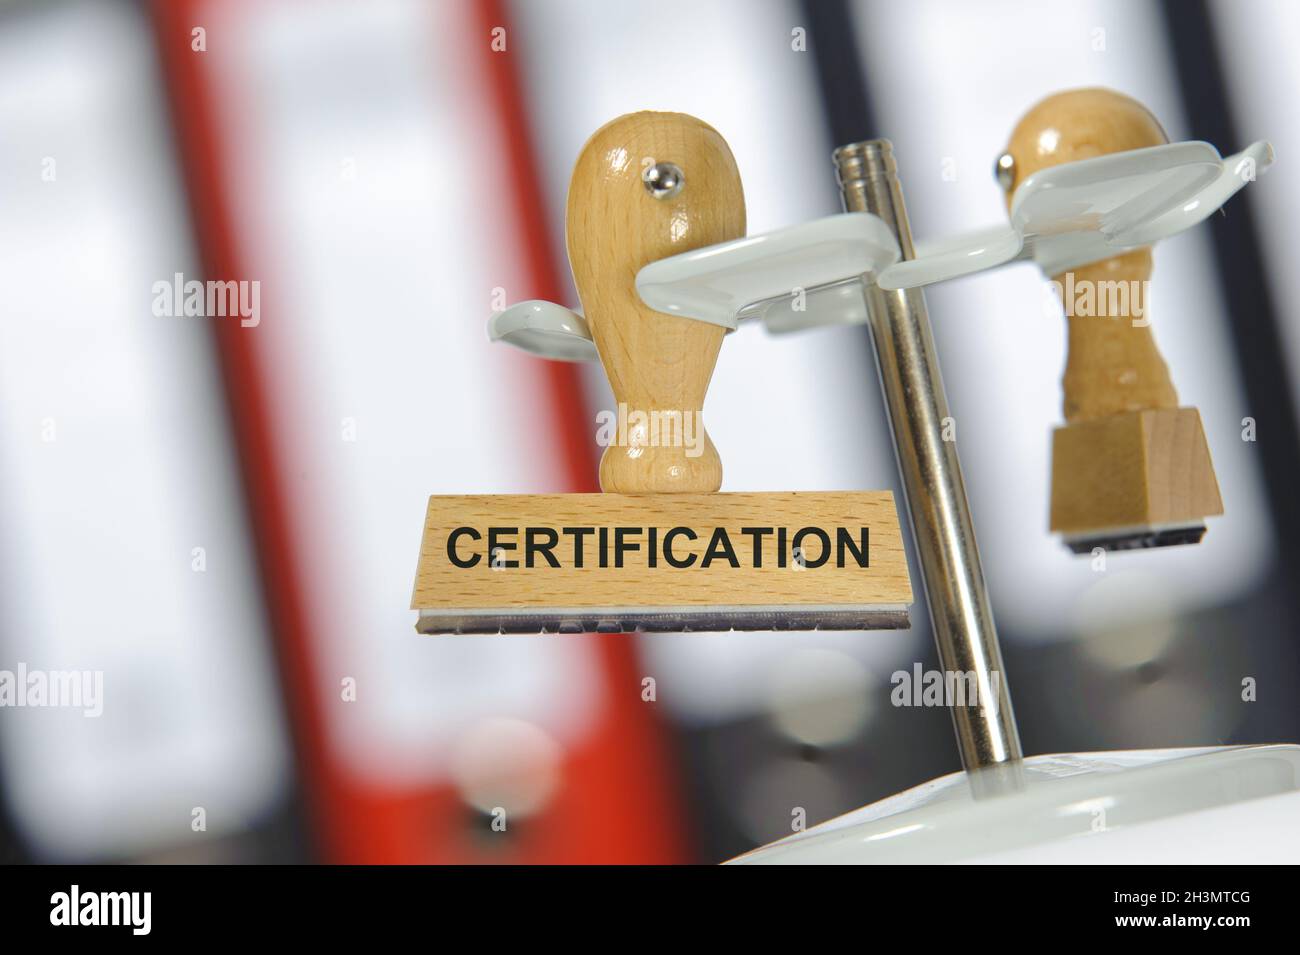 Certification printed on rubber stamp Stock Photo